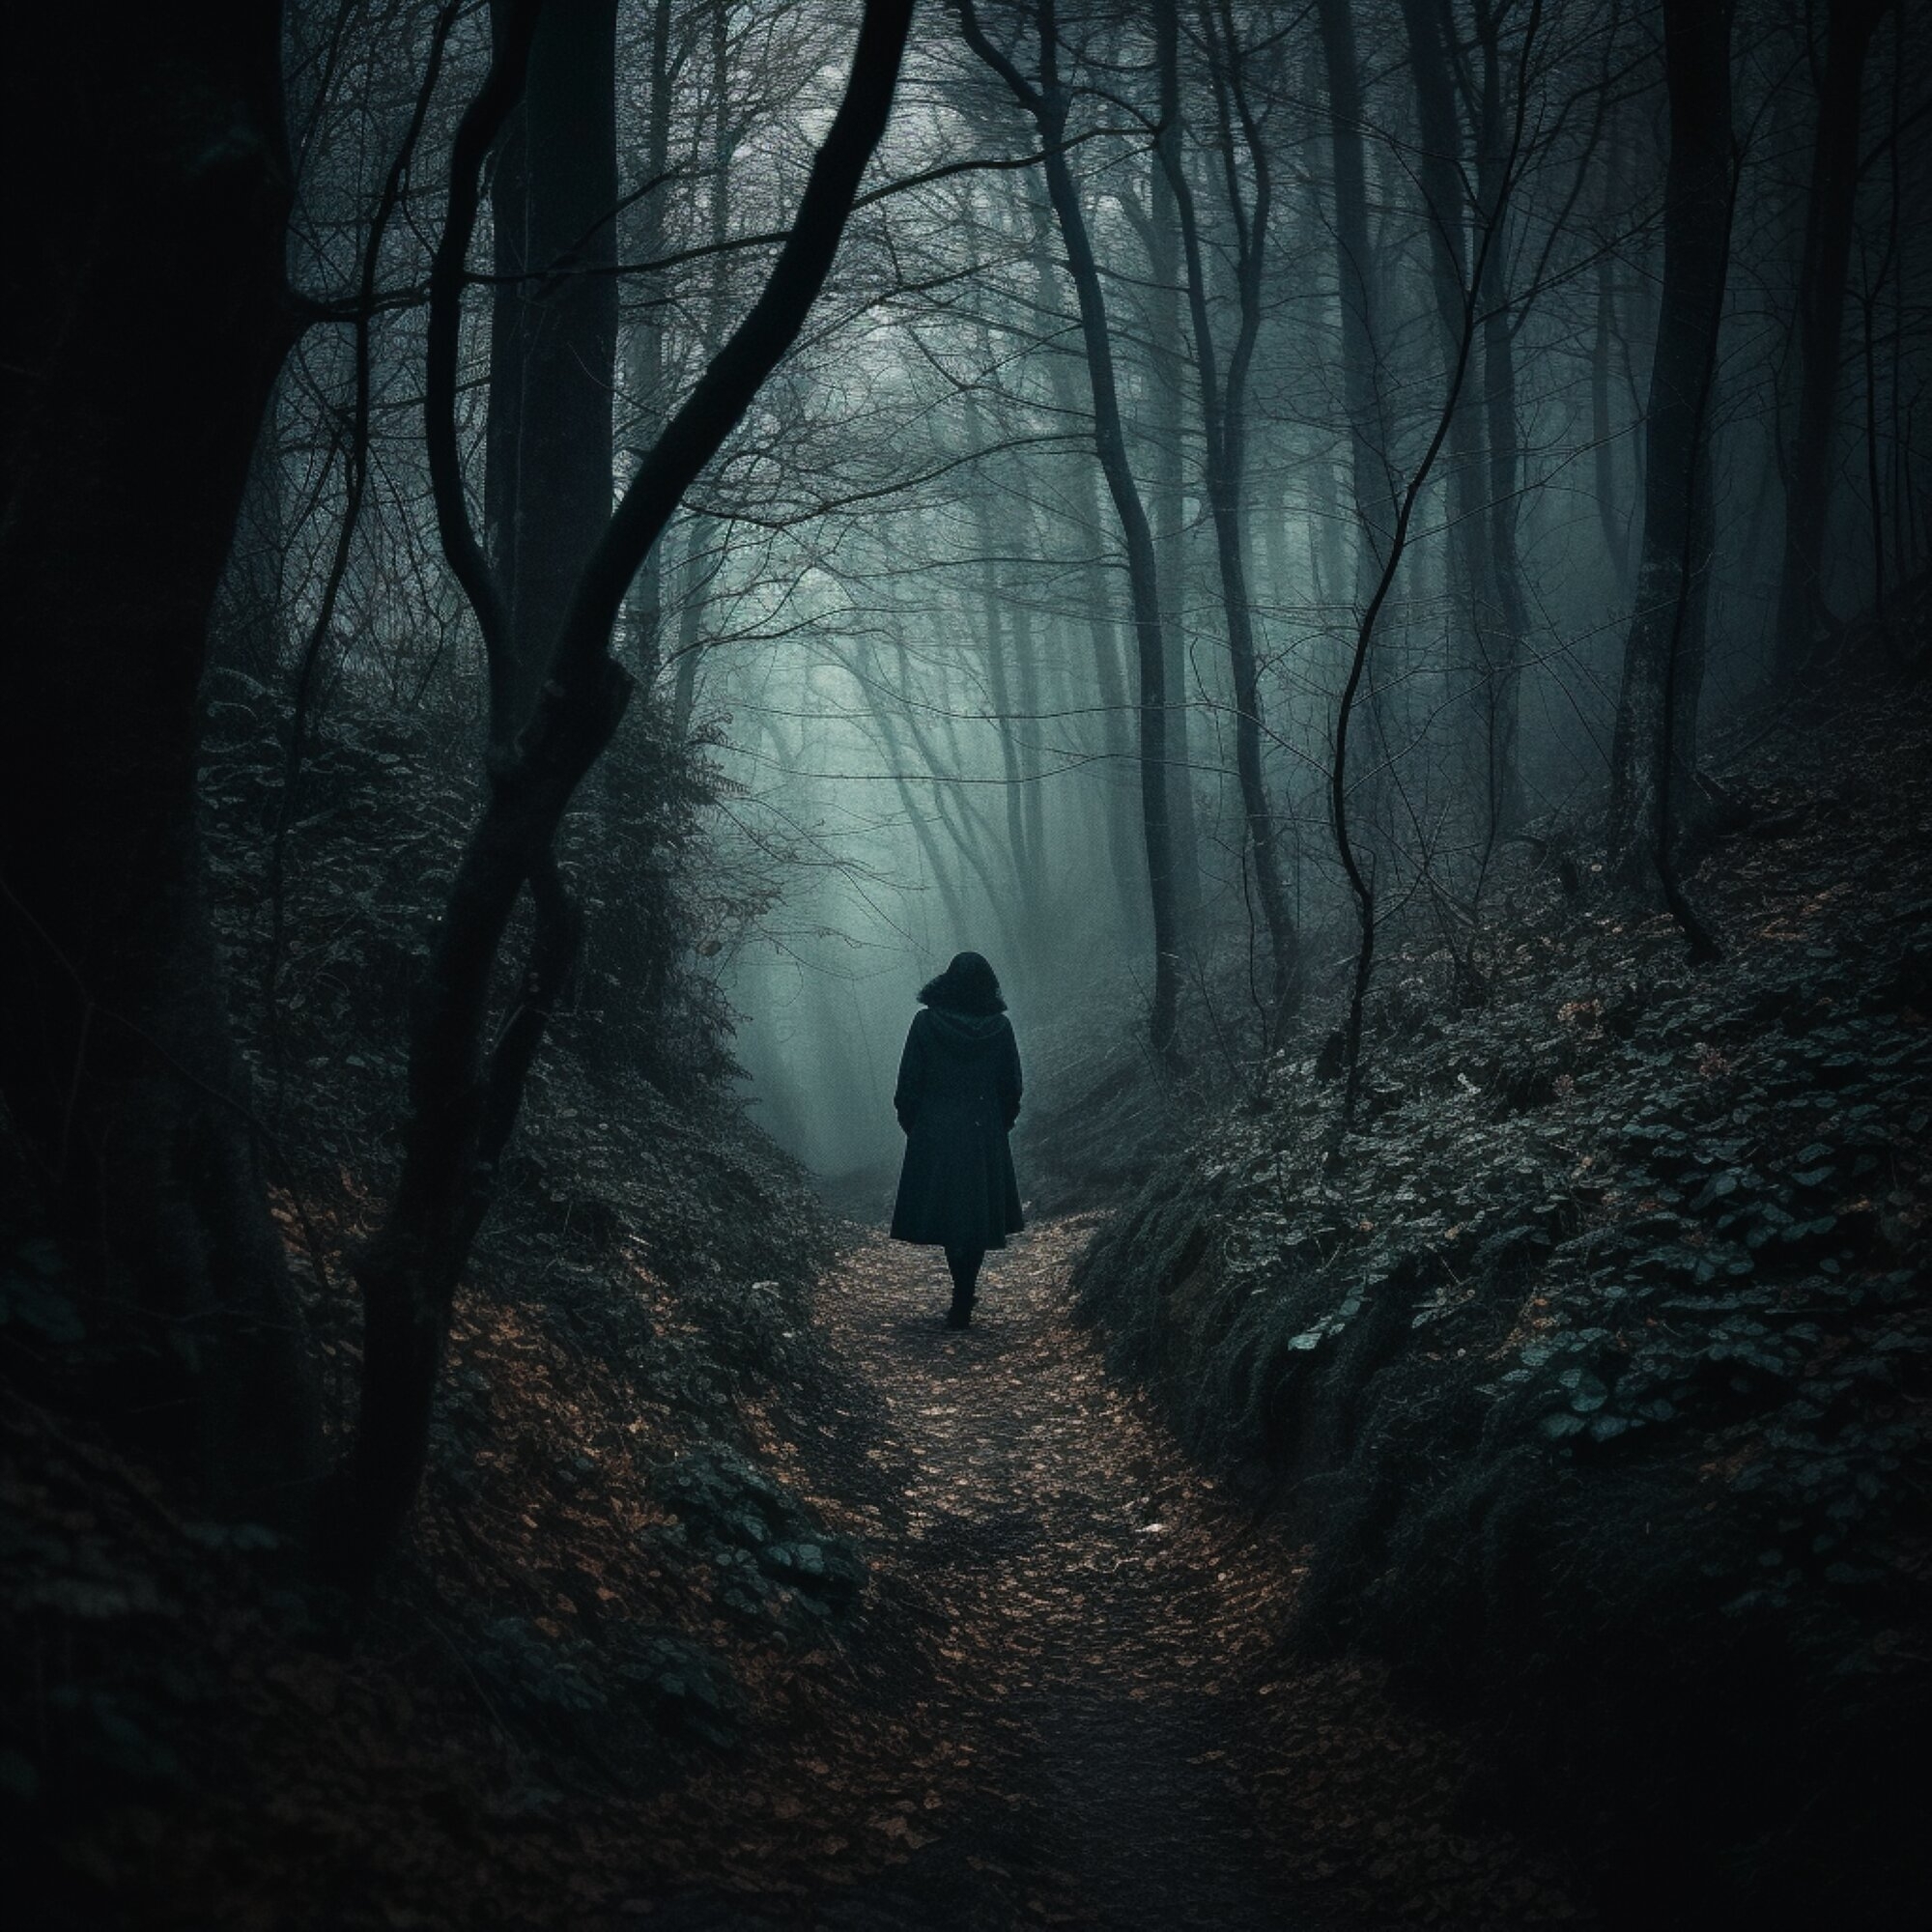 Image of a woman in a raincoat walking along a path in the middle of a dark forest. | Source: Shutterstock